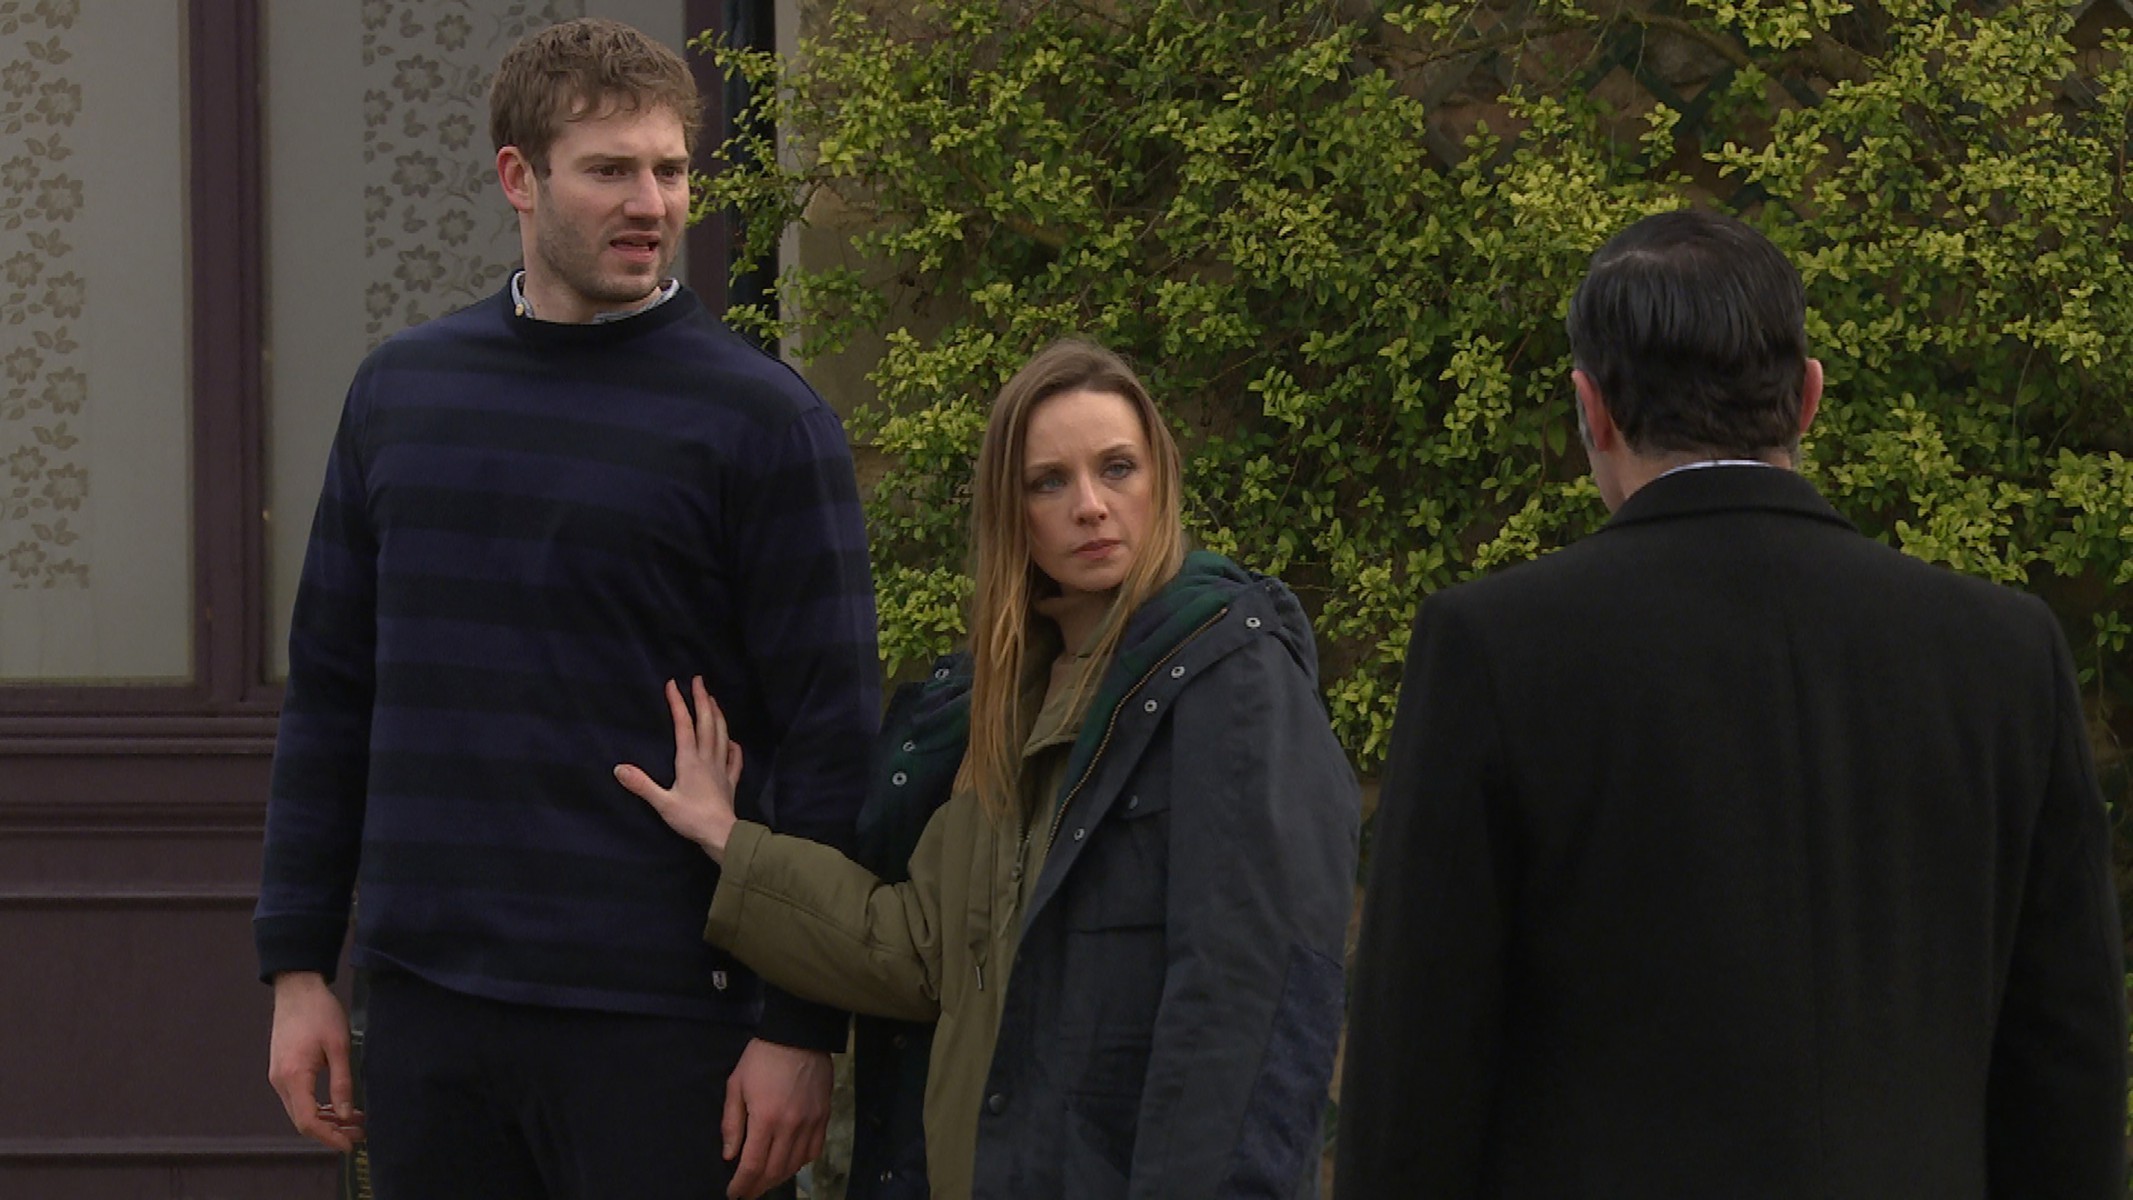 Jamie can't stand Graham after finding out he had a one-night stand with Andrea